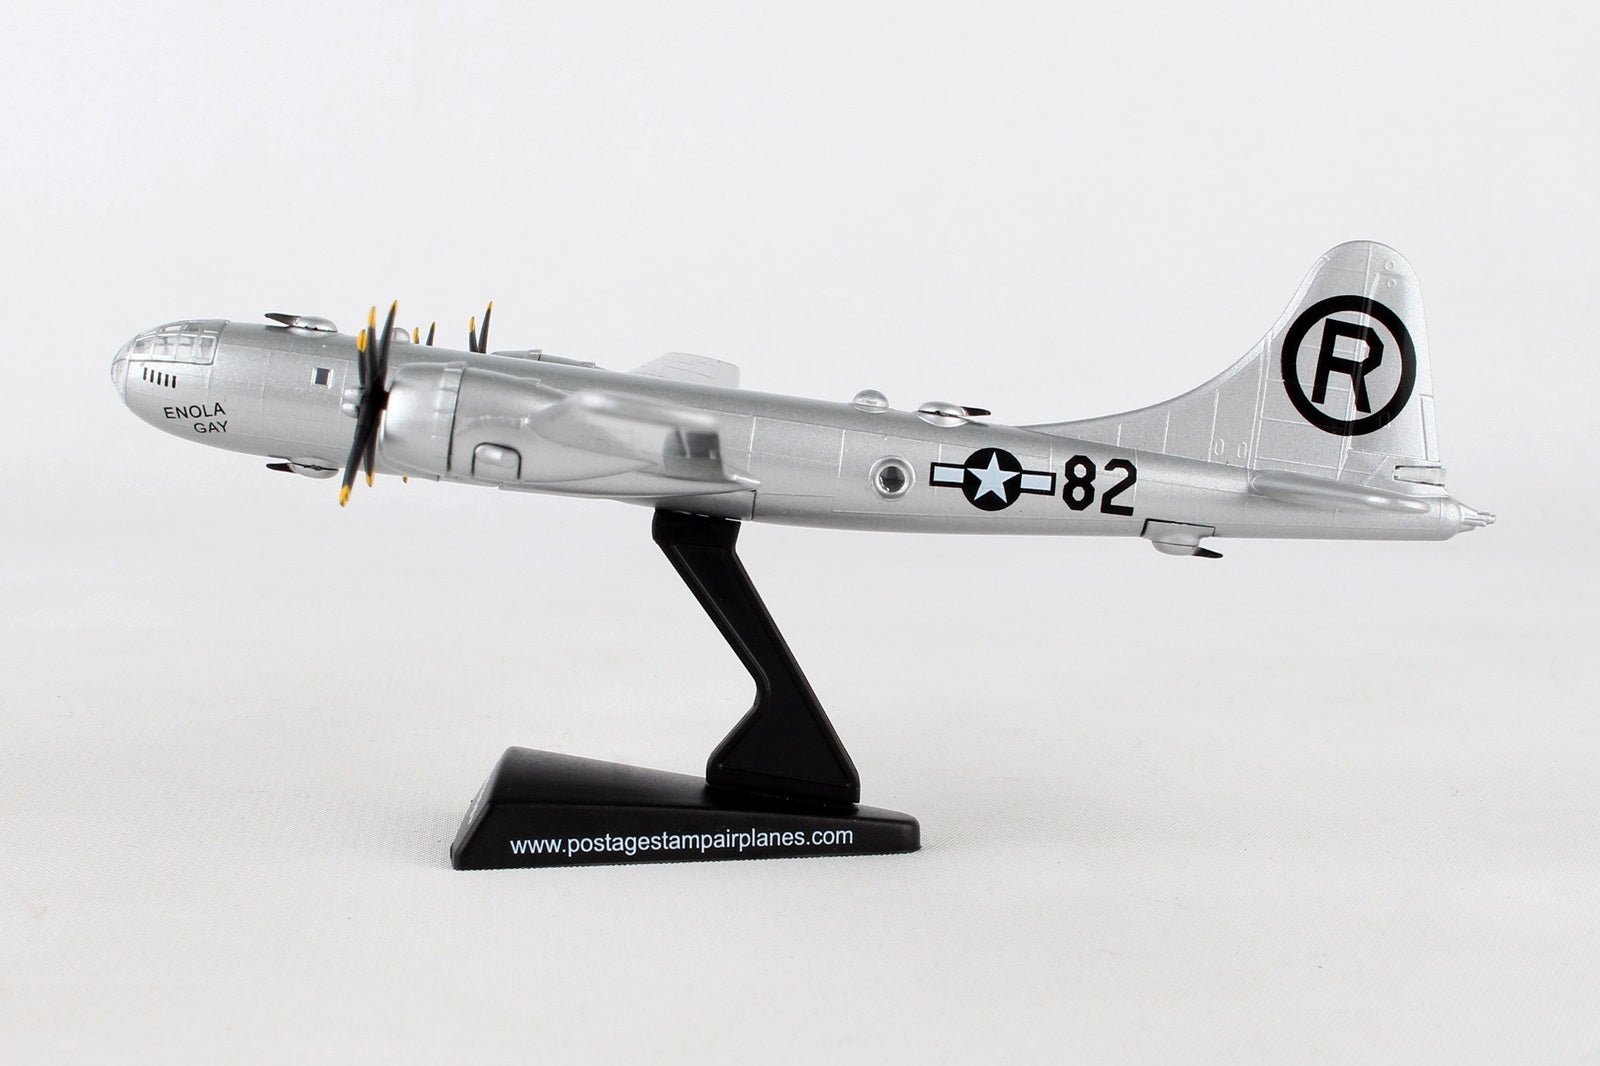 Daron® "Postage Stamp" B - 29 Superfortress Enola Gay Diecast Collectible Airplane, 1/200 Scale - Micro - Mark Diecast Planes